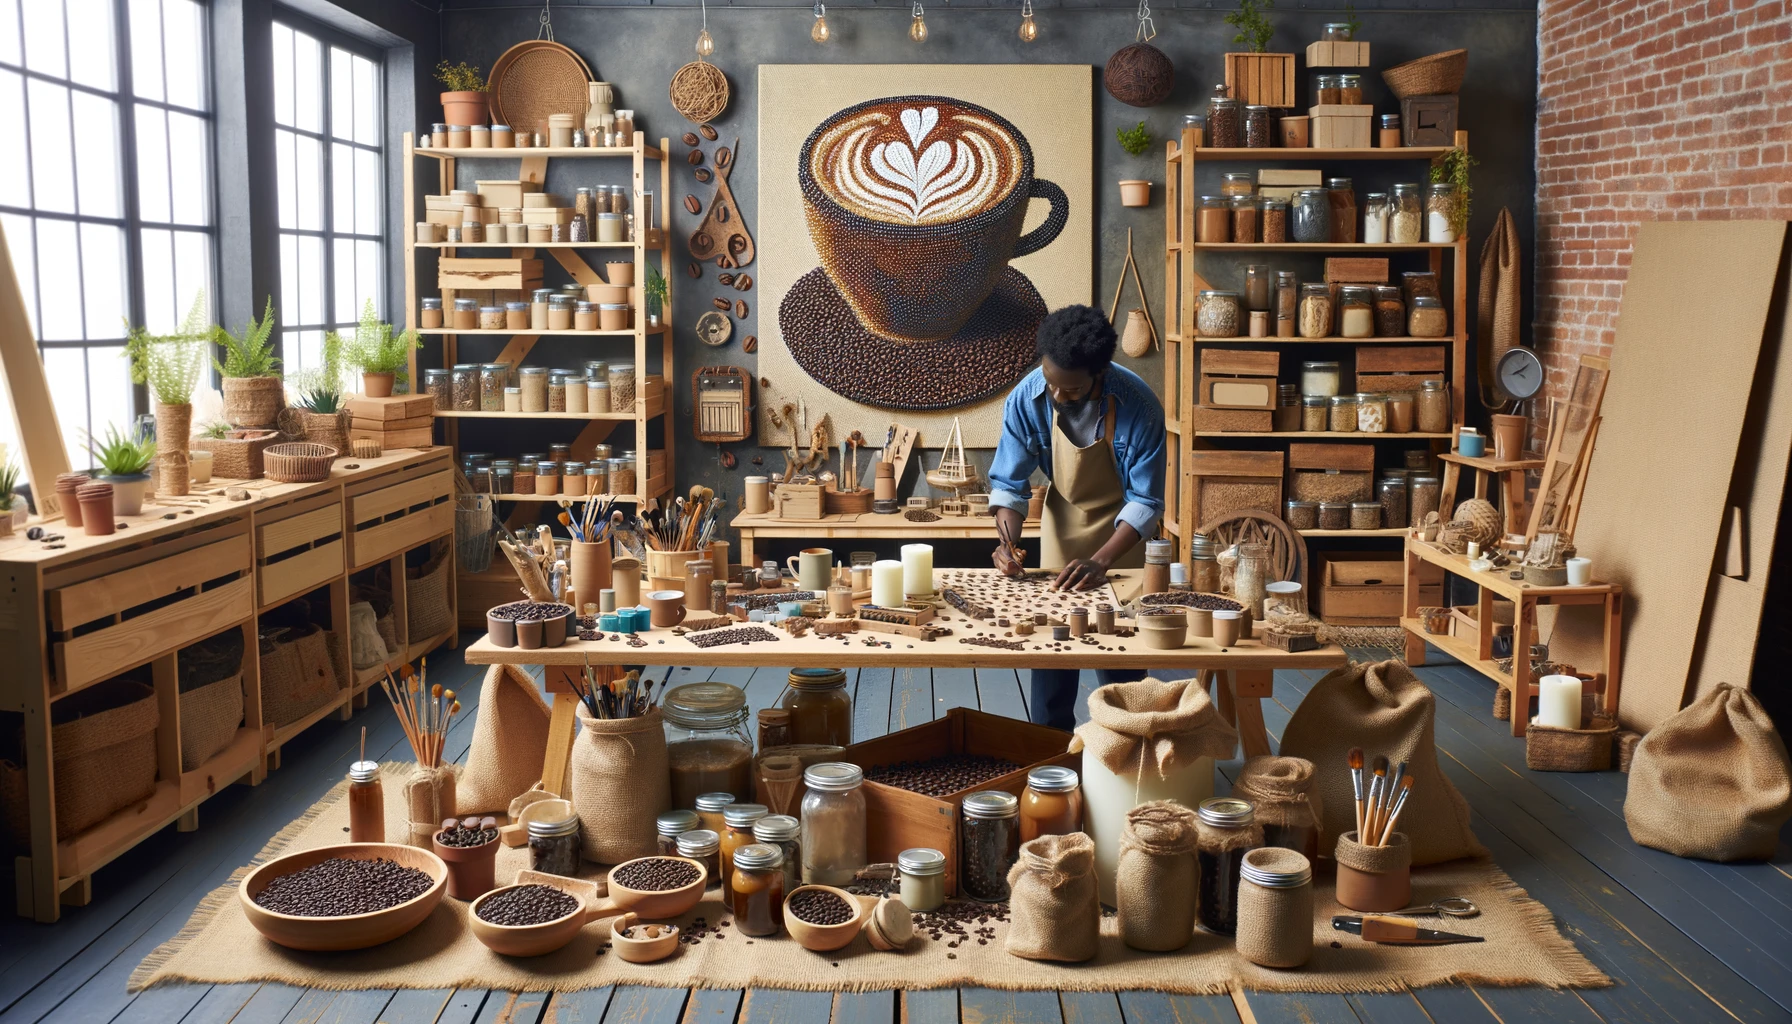 A spacious home workshop scene, showcasing a variety of DIY coffee crafts